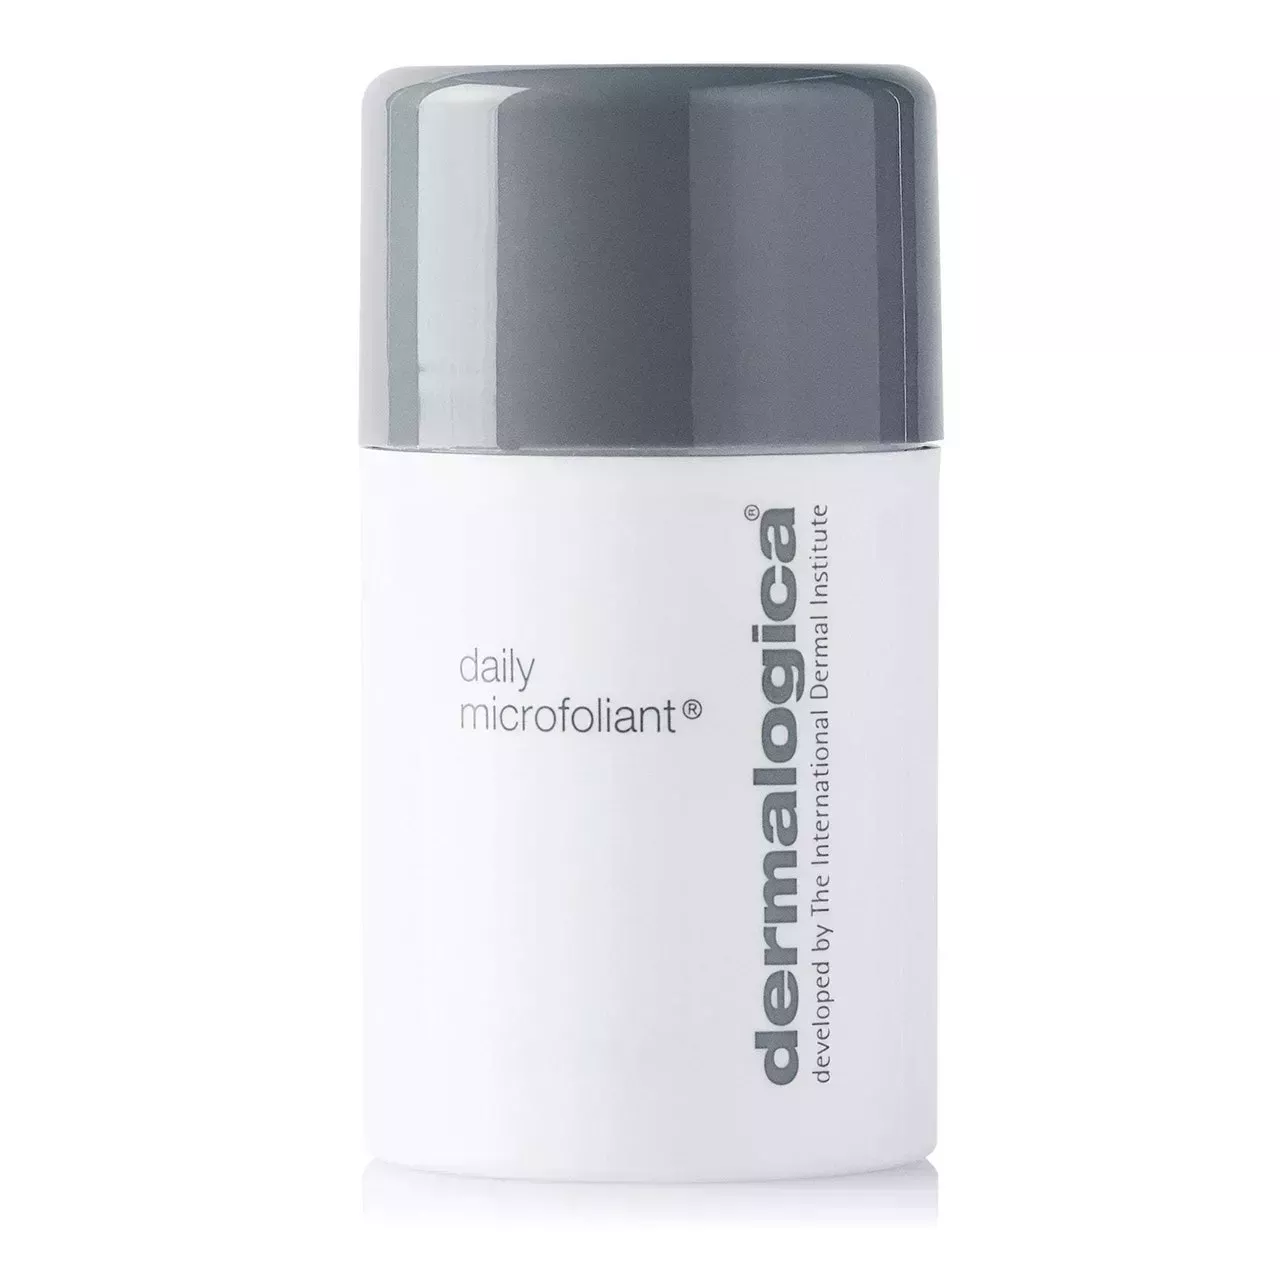 bottle of dermalogica daily microfoliant on a white background